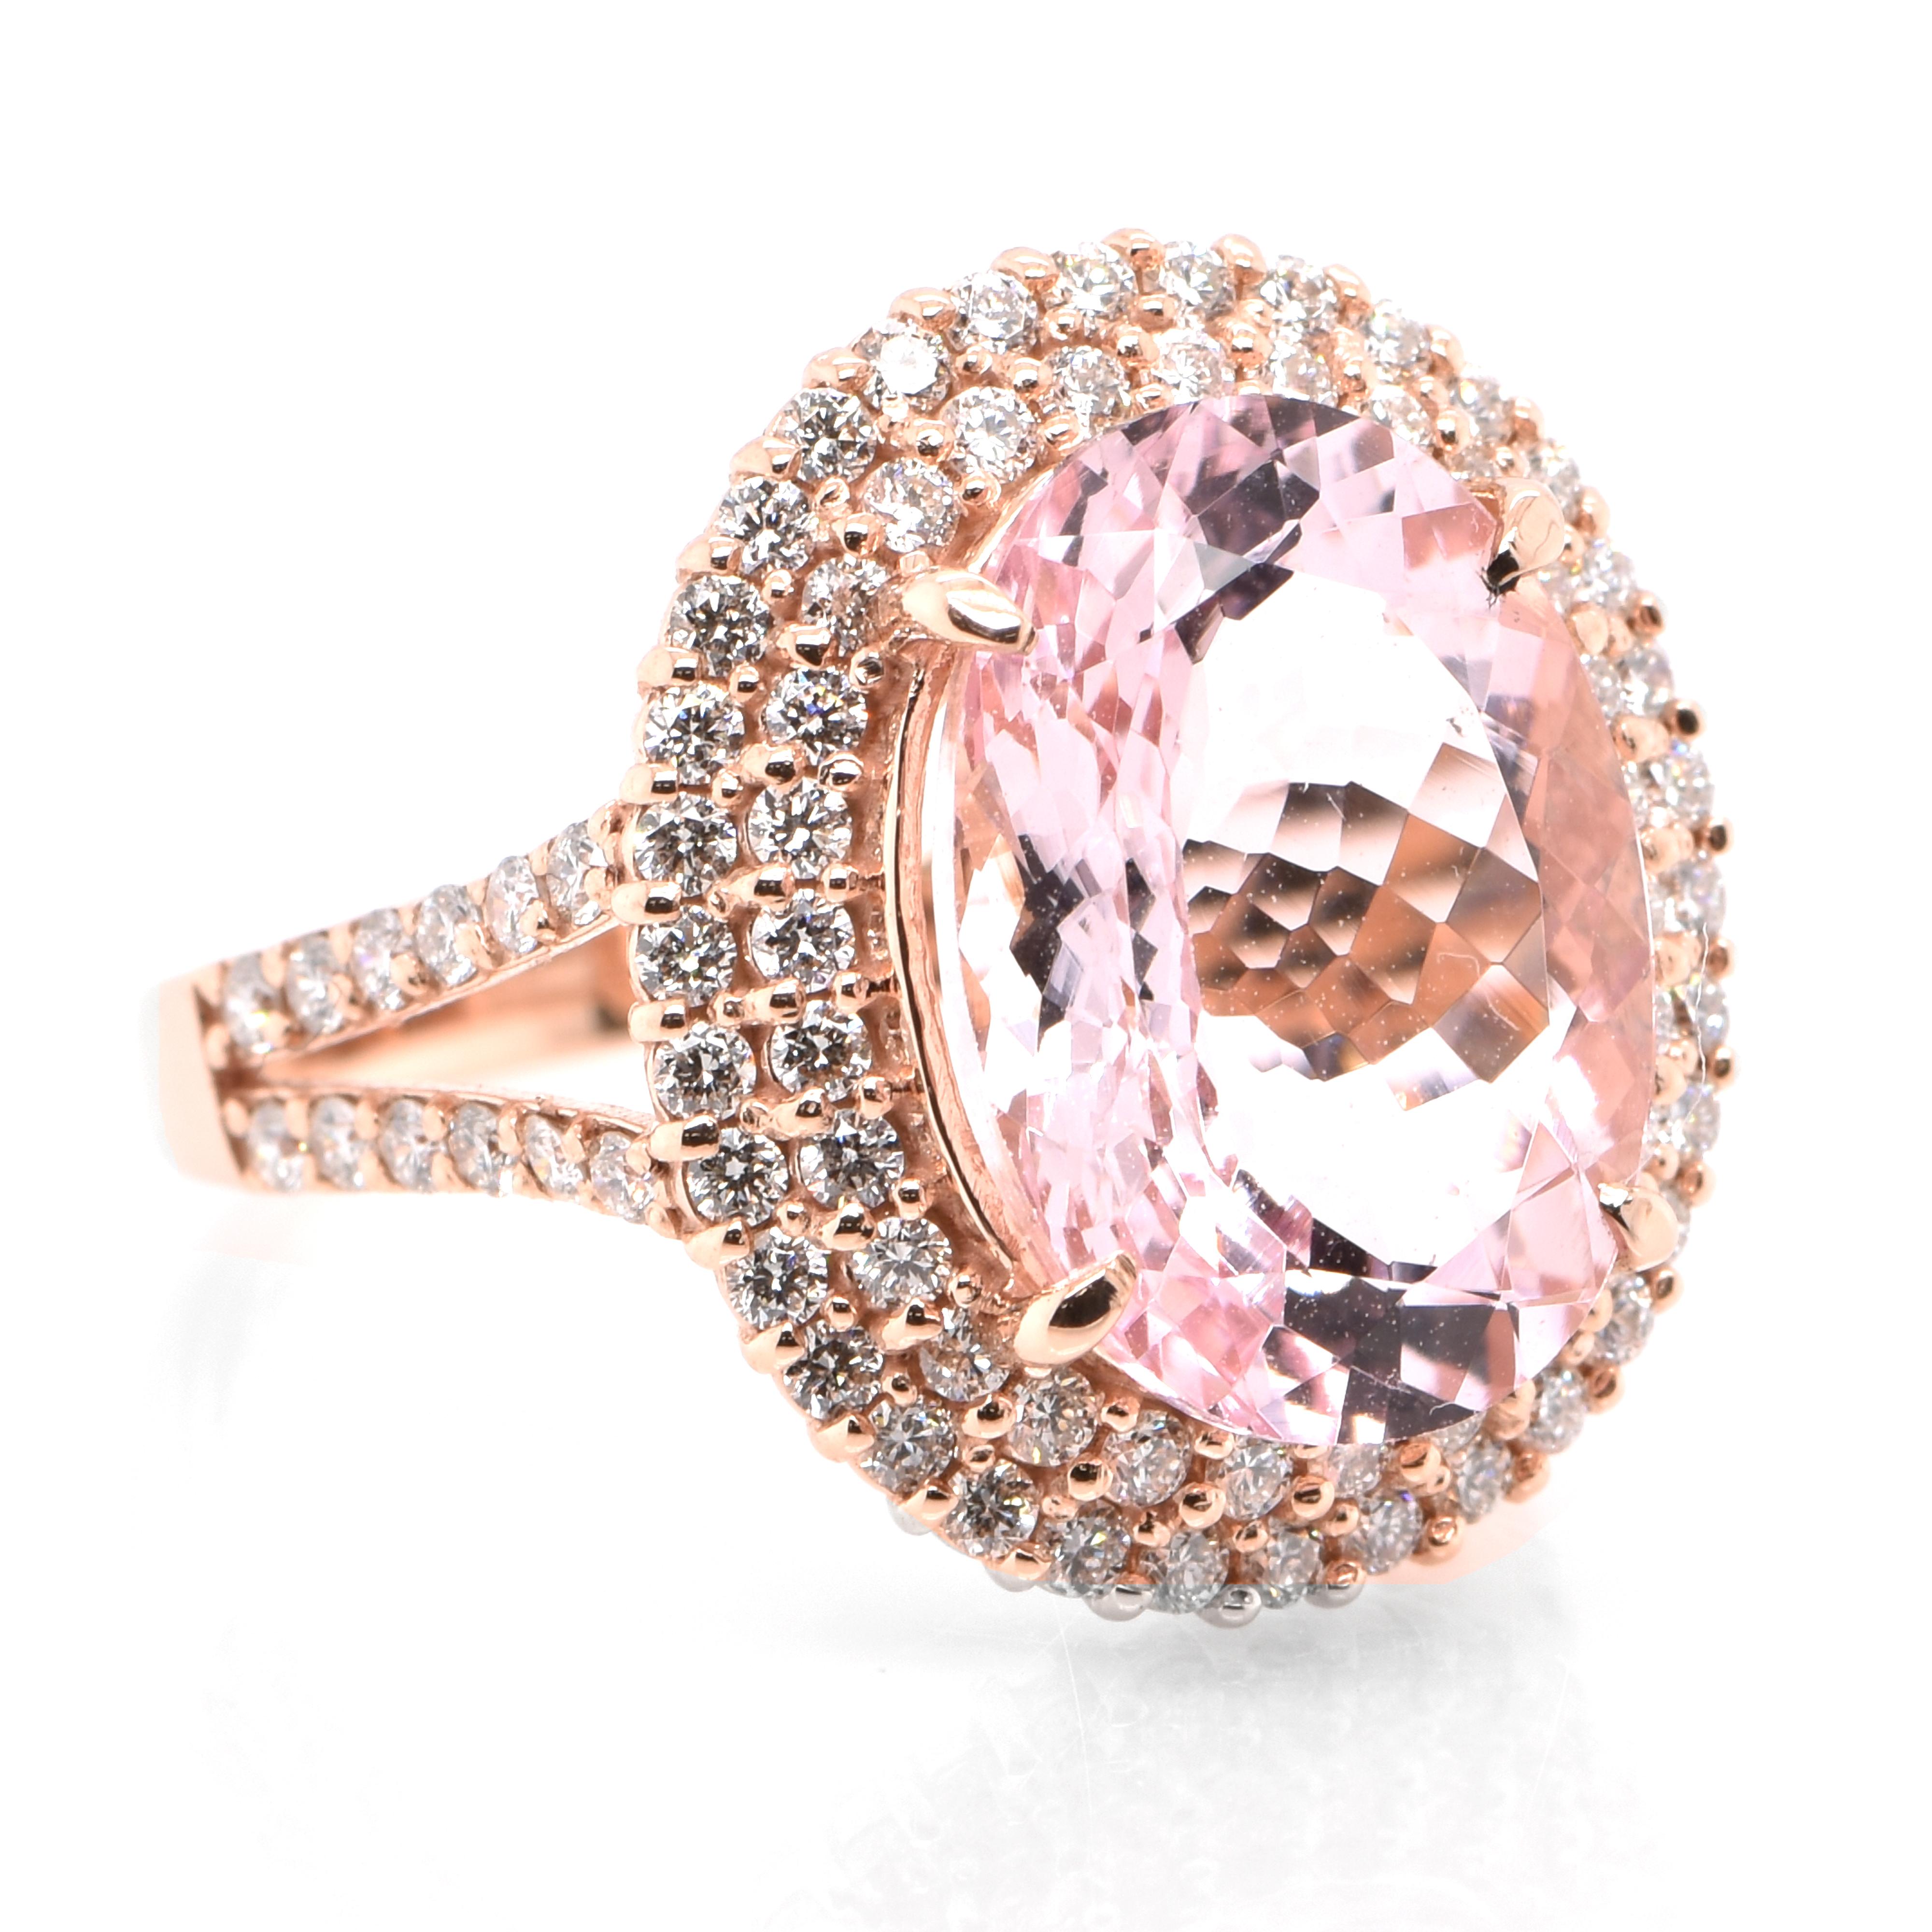 A beautiful Cocktail Ring featuring a 5.38 Carat, Natural Morganite (Pink Beryl) and 0.86 Carats of Diamond Accents set in 18 Karat Rose Gold. Having been first discovered in the early 1900s, Morganite was named after the famed banker and gem